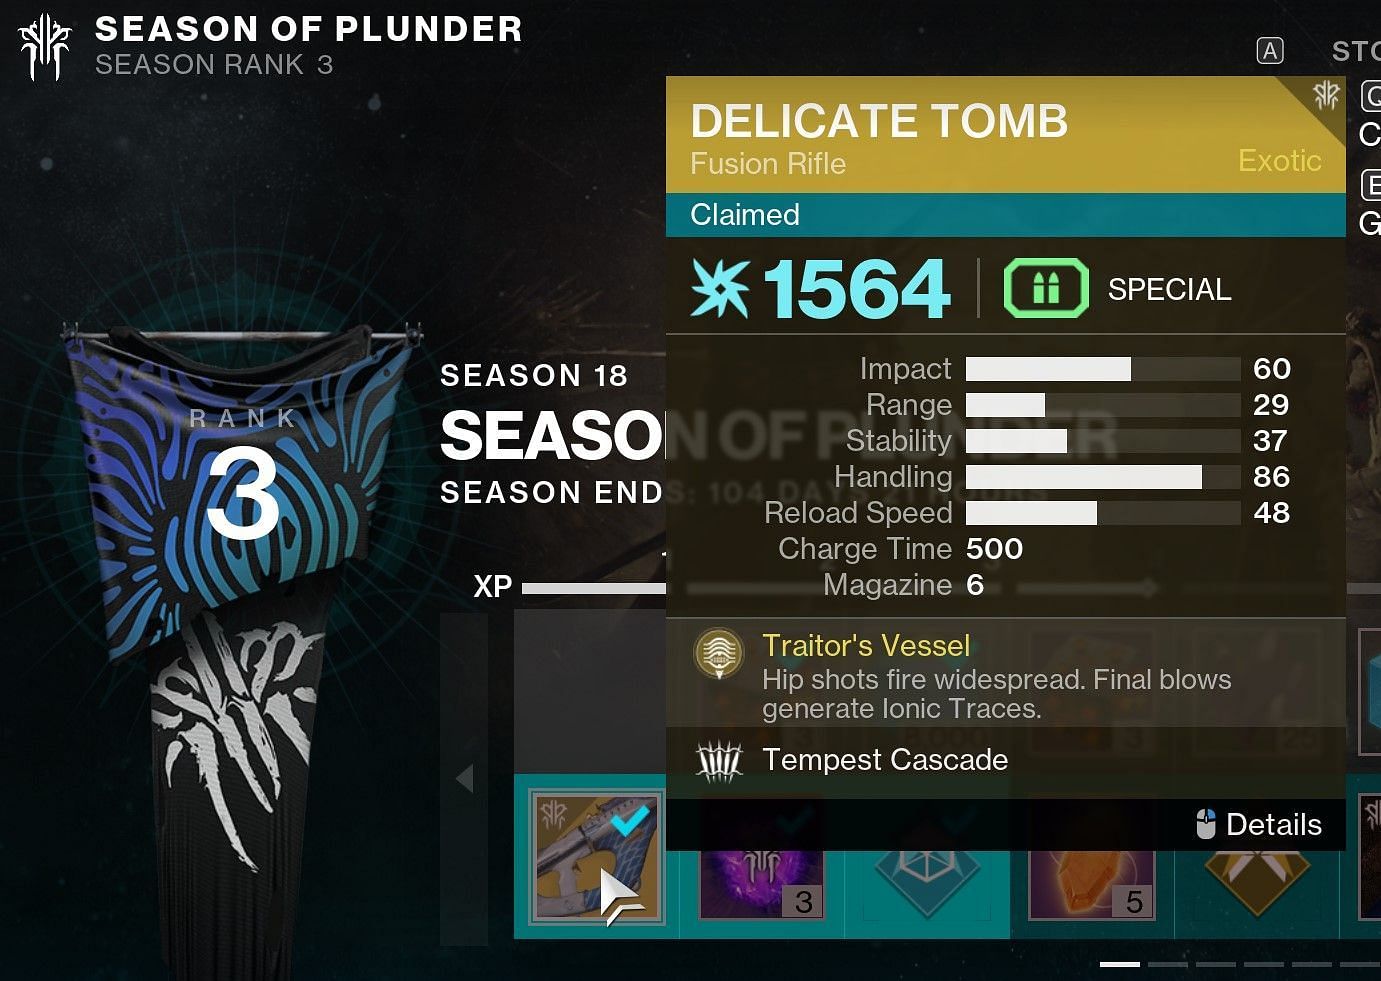 The Delicate Tomb is earned through the Destiny 2 Season Pass (Image via Bungie)